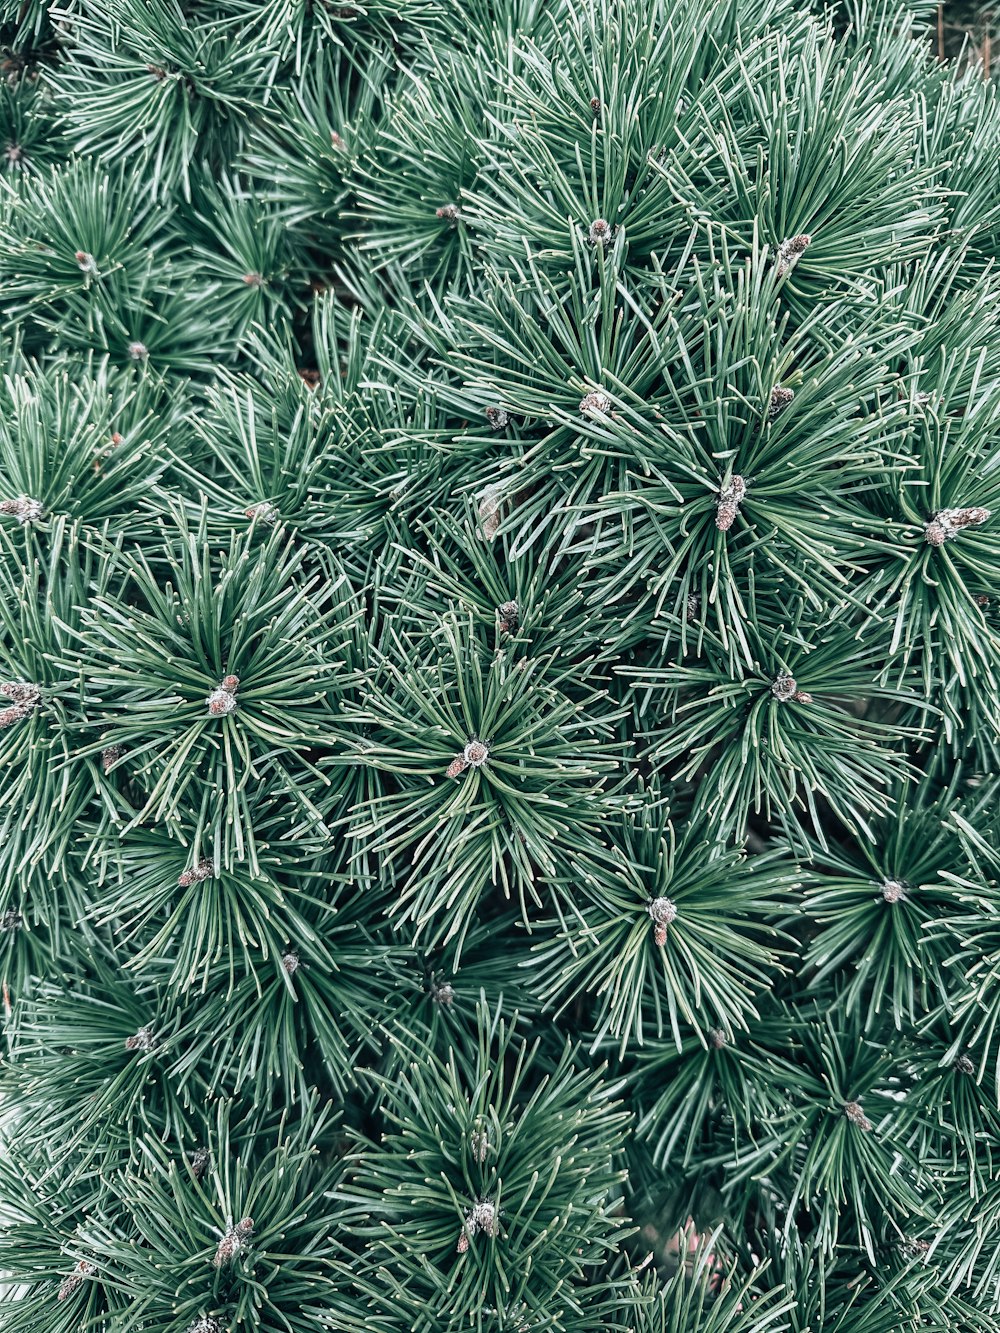 a close up of a pine tree with lots of needles